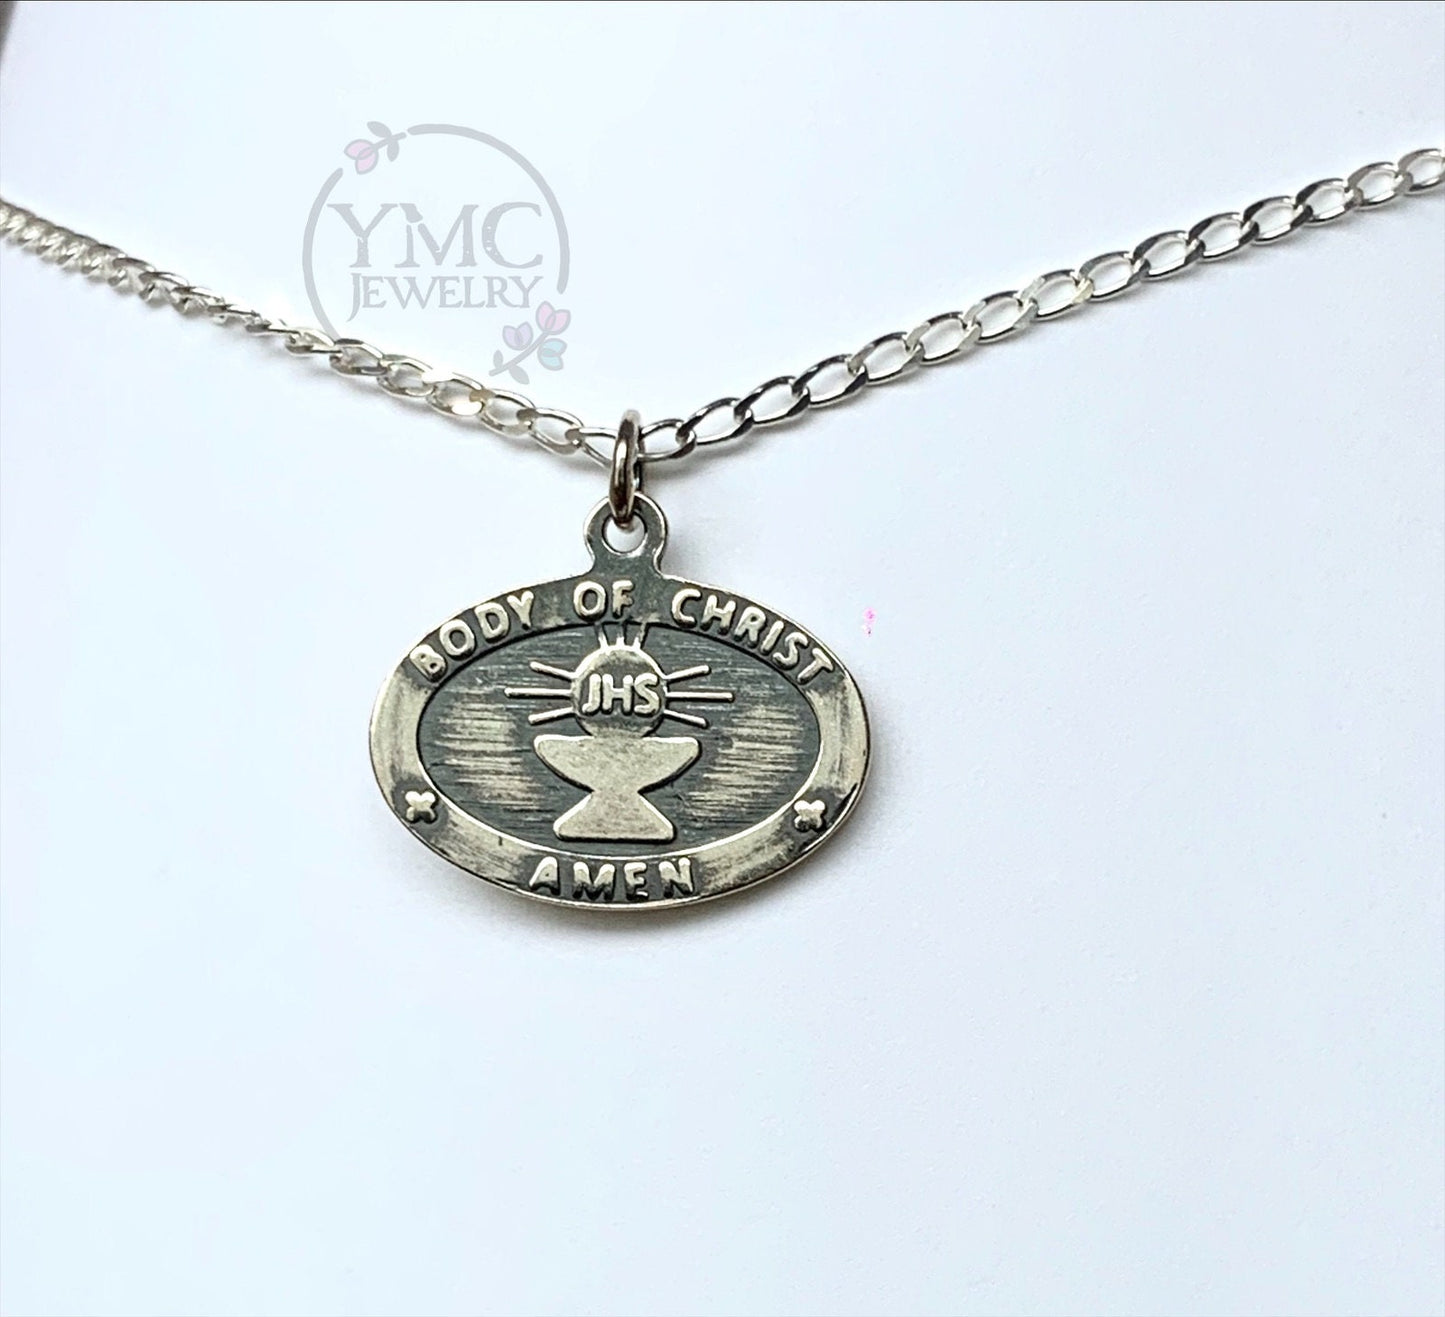 My First Holy Communion Medallion Necklace,Eucharist Medallion Necklace,Body of Christ Necklace,Personalized First Communion Necklace